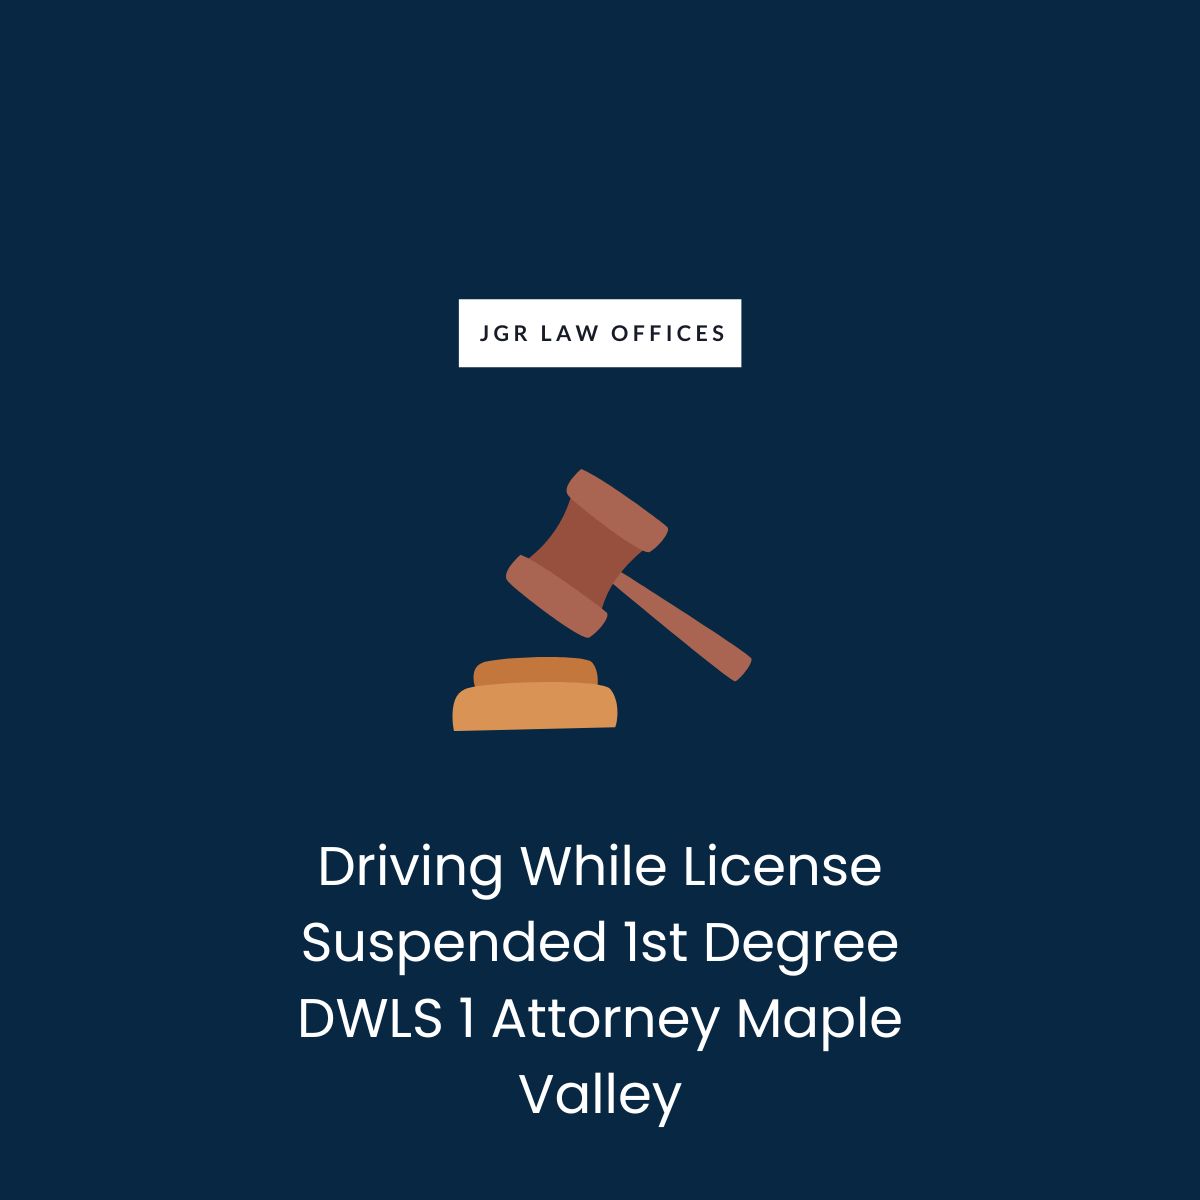 Driving While License Suspended 1st Degree DWLS 1 Attorney Maple Valley